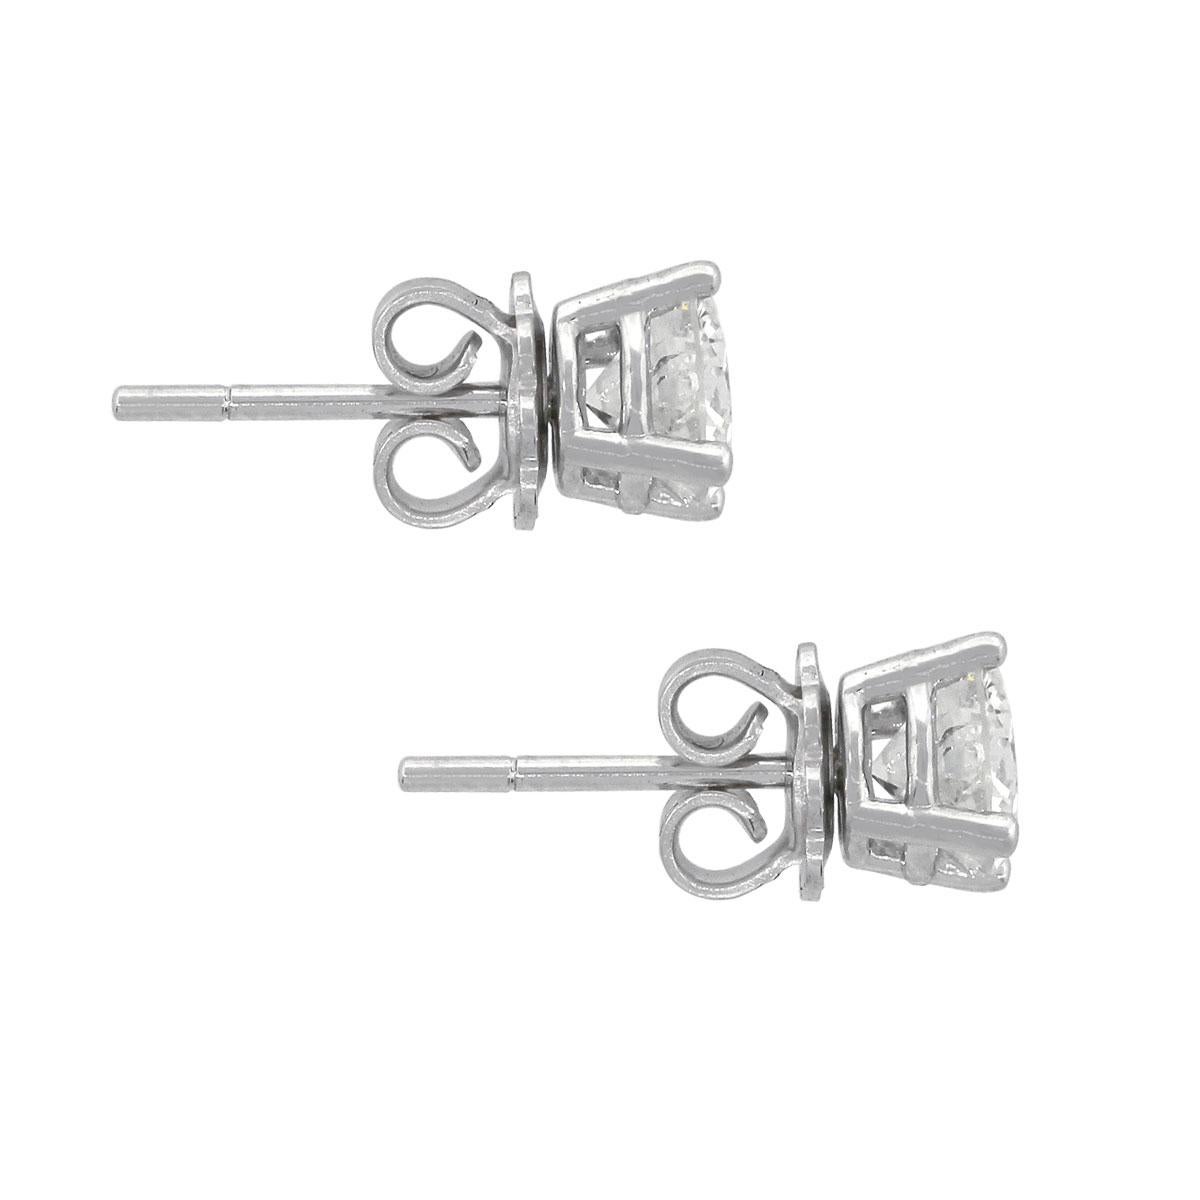 Material: 14k white gold
Diamond Details: Approx. 2.04ctw of round brilliant diamonds. Diamonds are G/H in color and SI-I in clarity
Measurements: 0.66″ x 0.21″ x 0.21″
Earrings Backs: Tension post
Total Weight: 2.5g (1.6dwt)
SKU: A30312448

